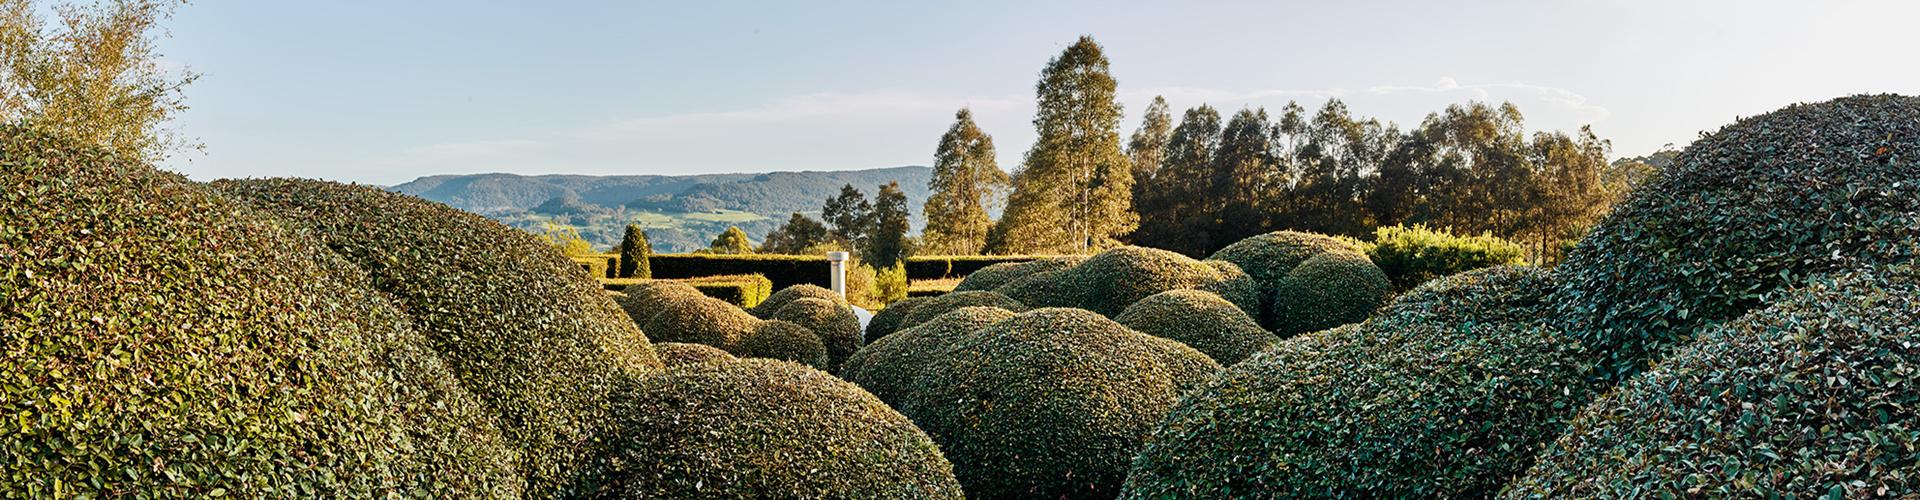 Dome shaped hedges sit in the foreground, with a view of a mountain range in the far distance.